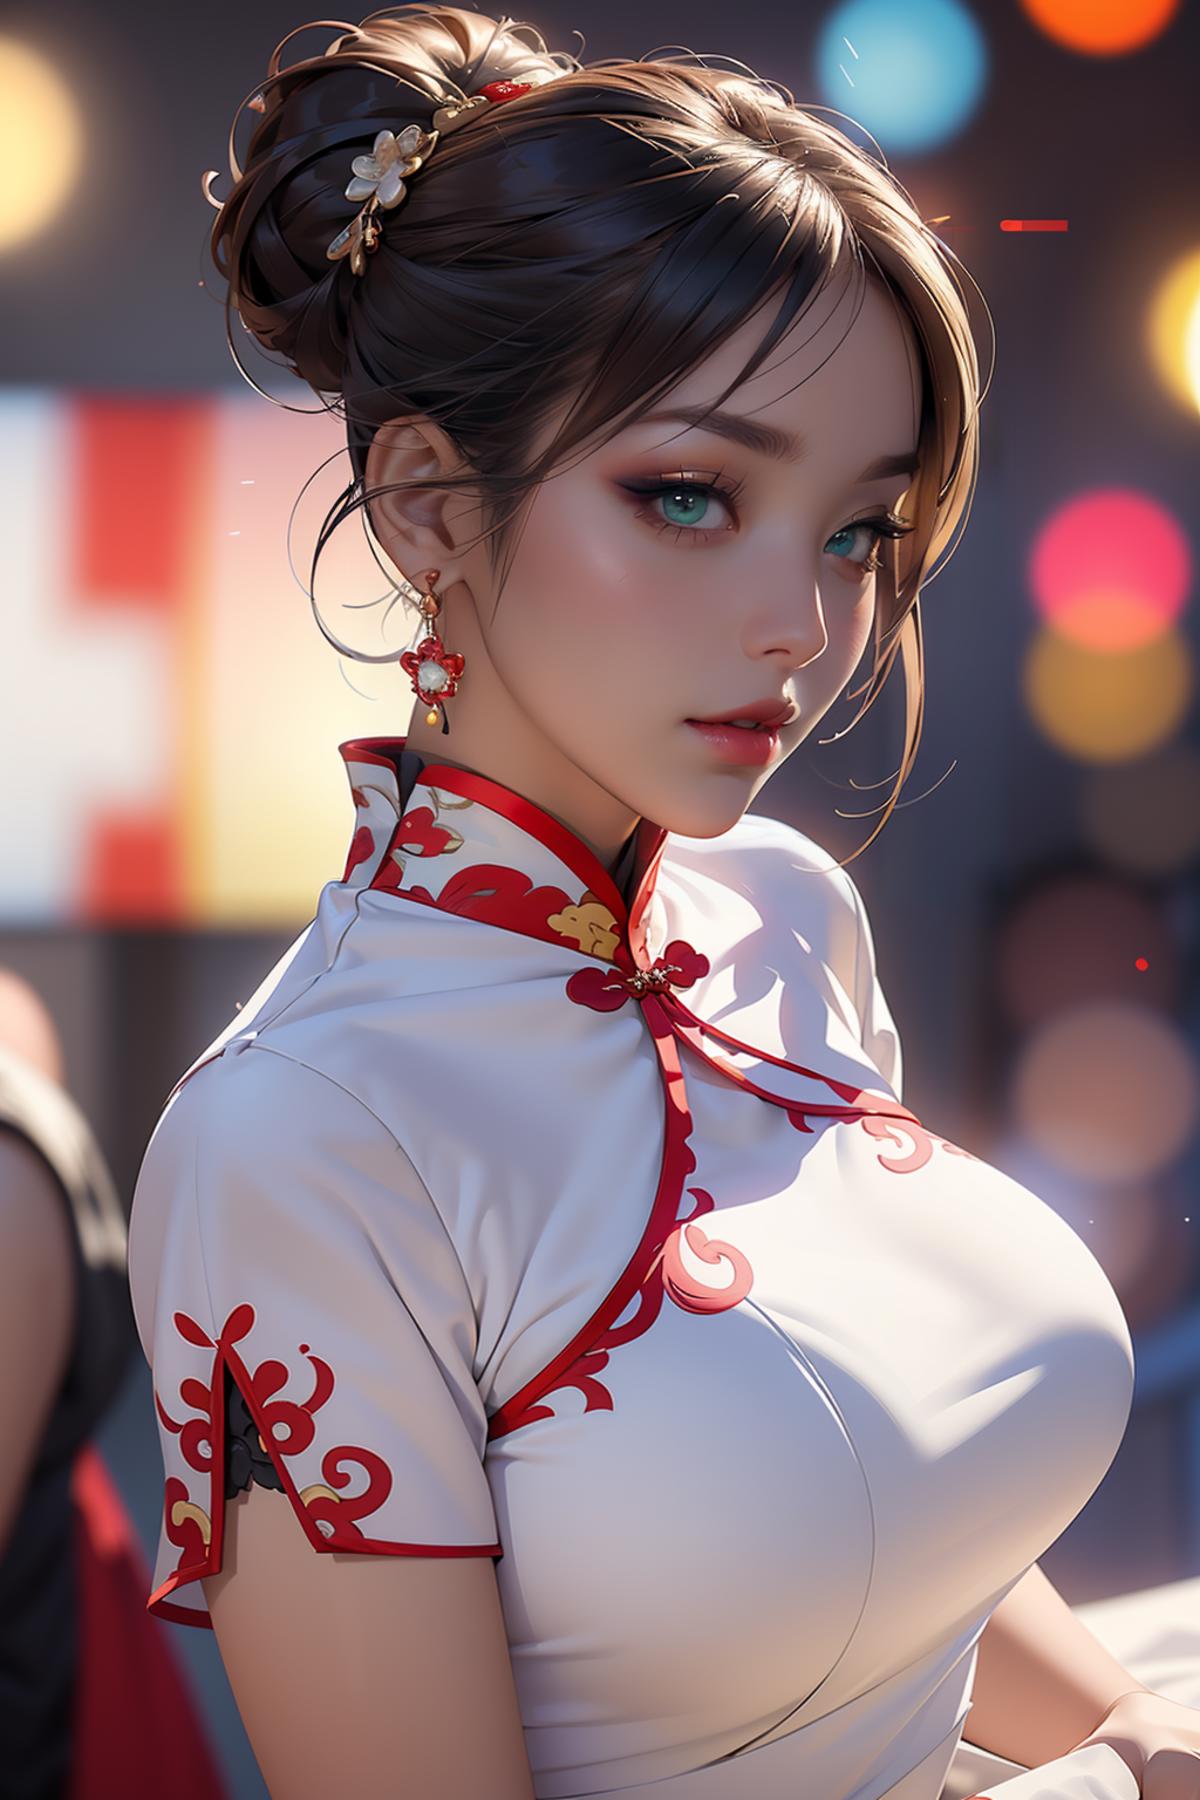 A beautiful Asian woman wearing a white dress with a red and gold pattern, a red ribbon, and earrings.